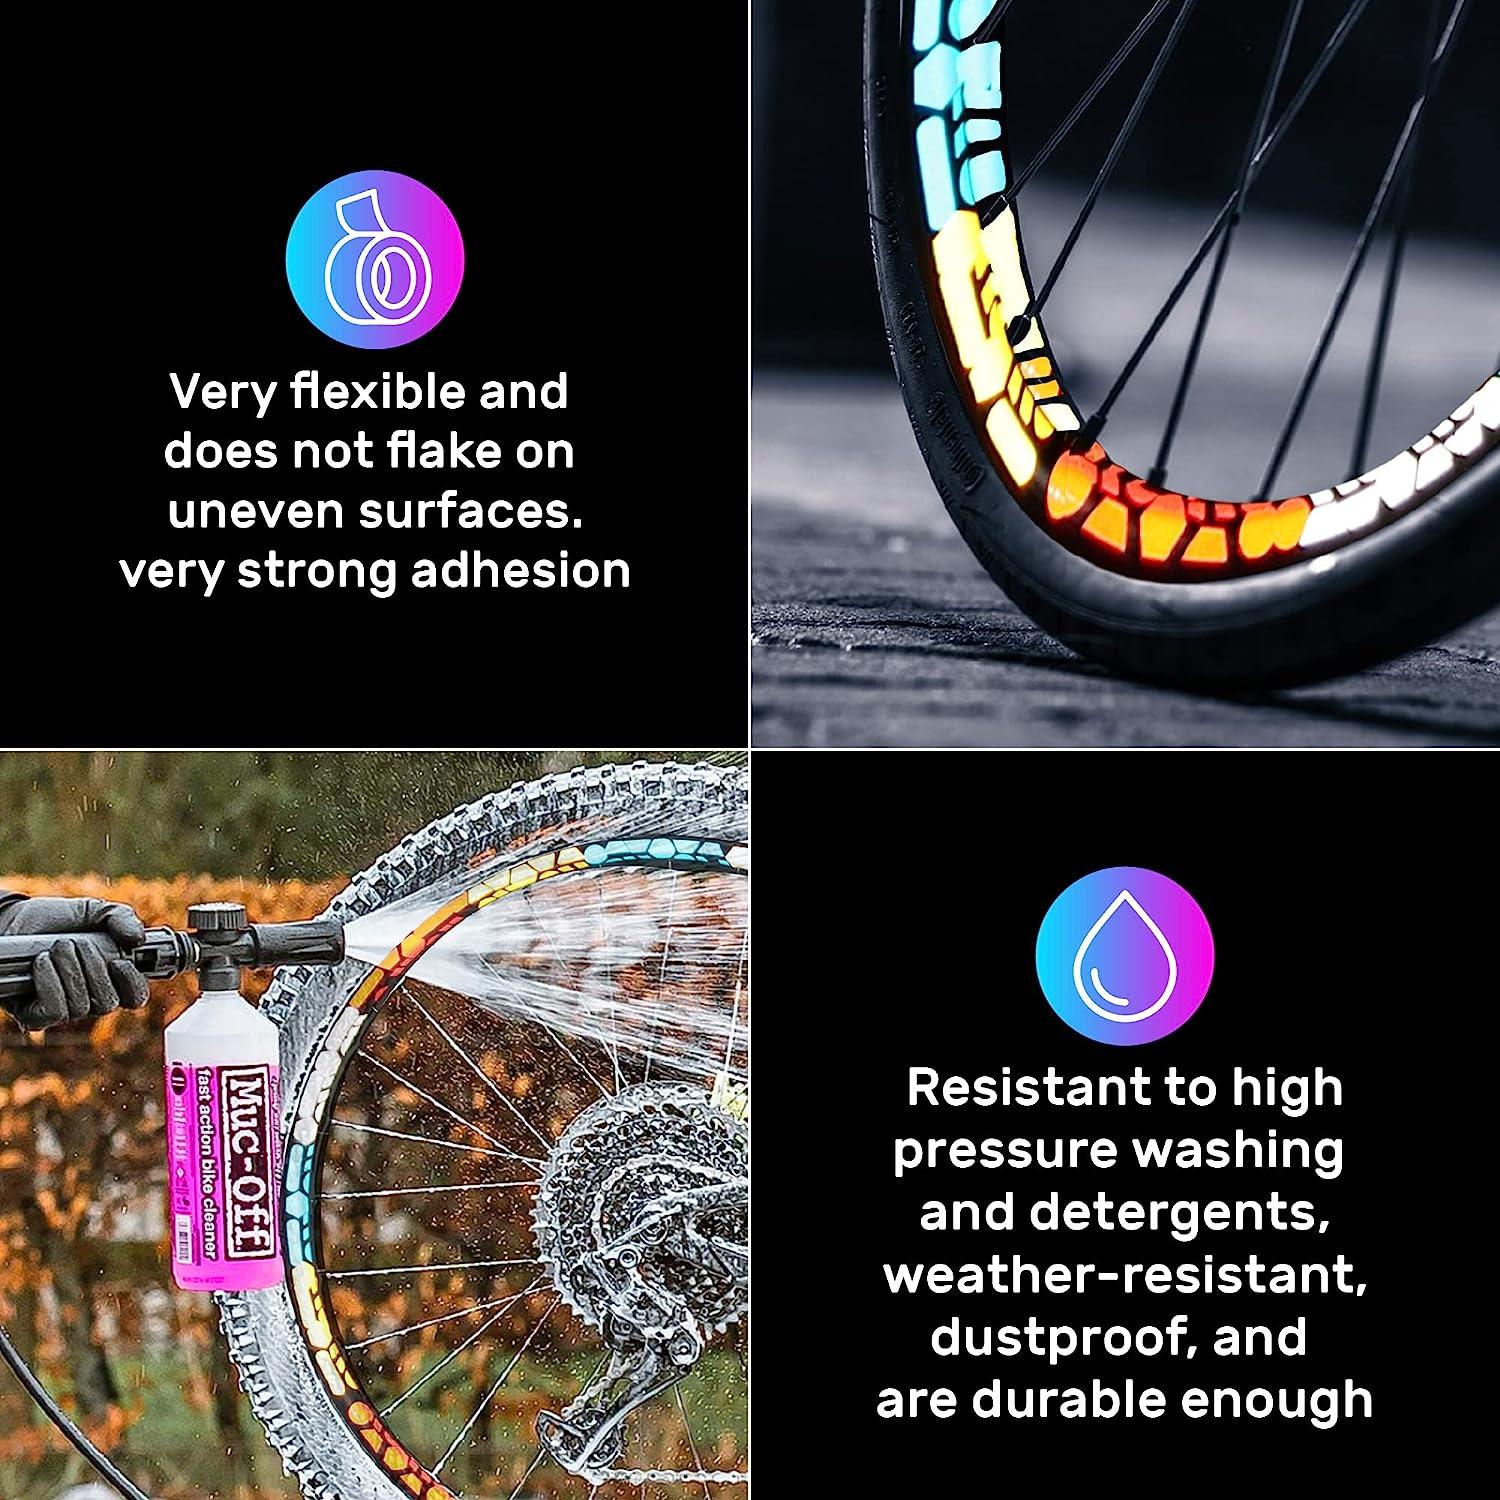 Reflective Stickers for Bikes 85pc (Blue)-Waterproof, High Visibility Bike  Stickers for Flat Surfaces-Nighttime Safety Reflective Stickers for